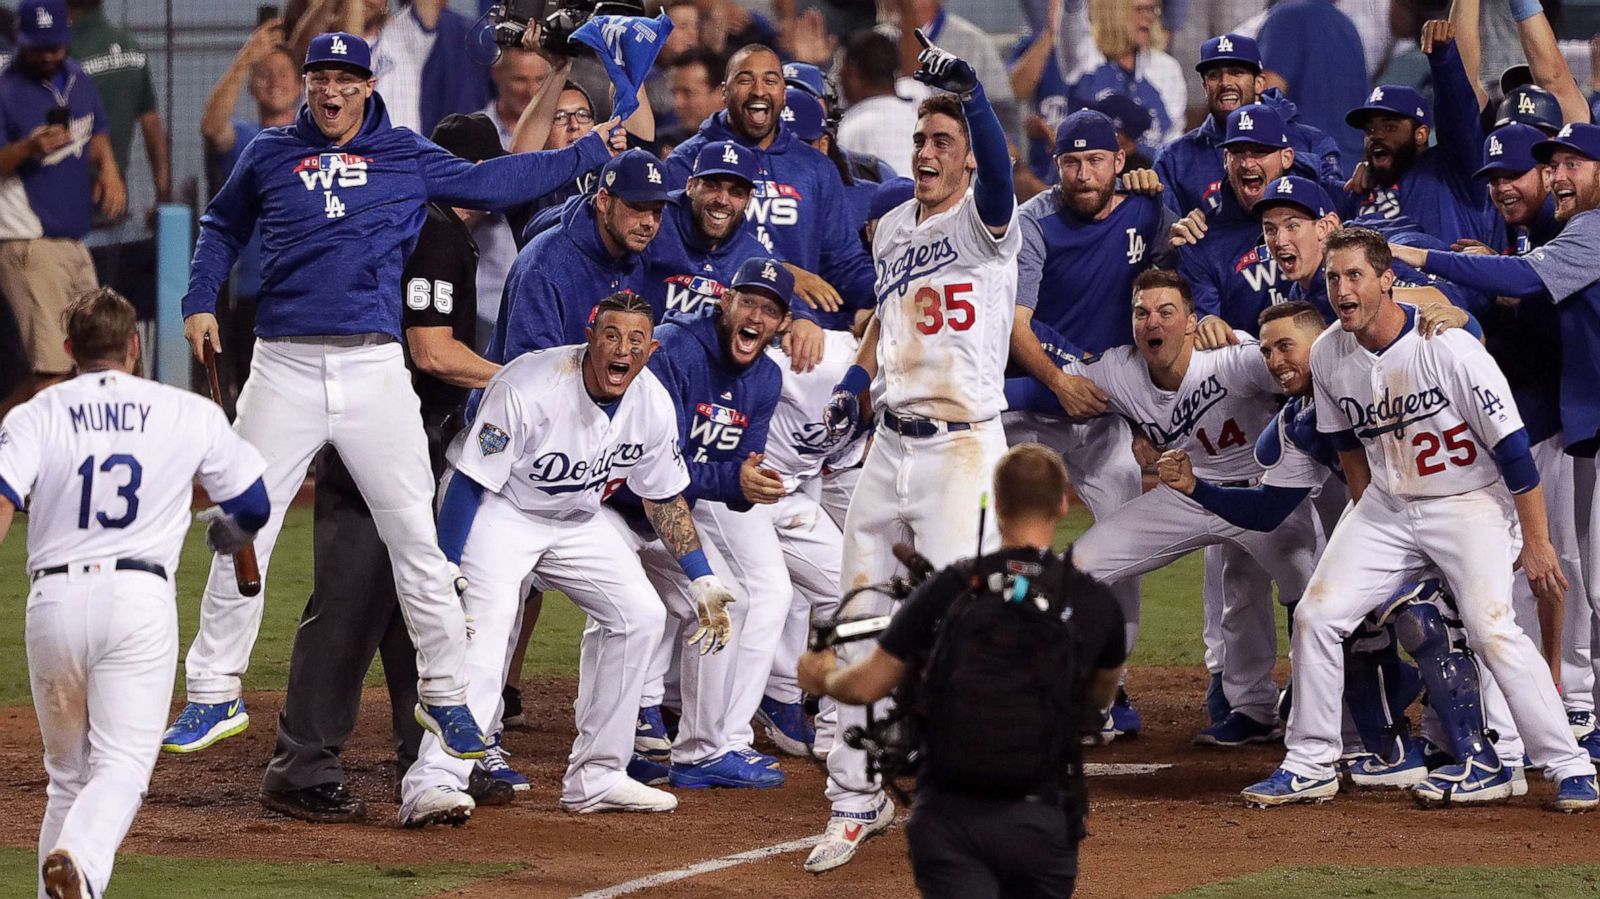 Los angeles dodgers 2020 World Series Champions League MLB dodgers